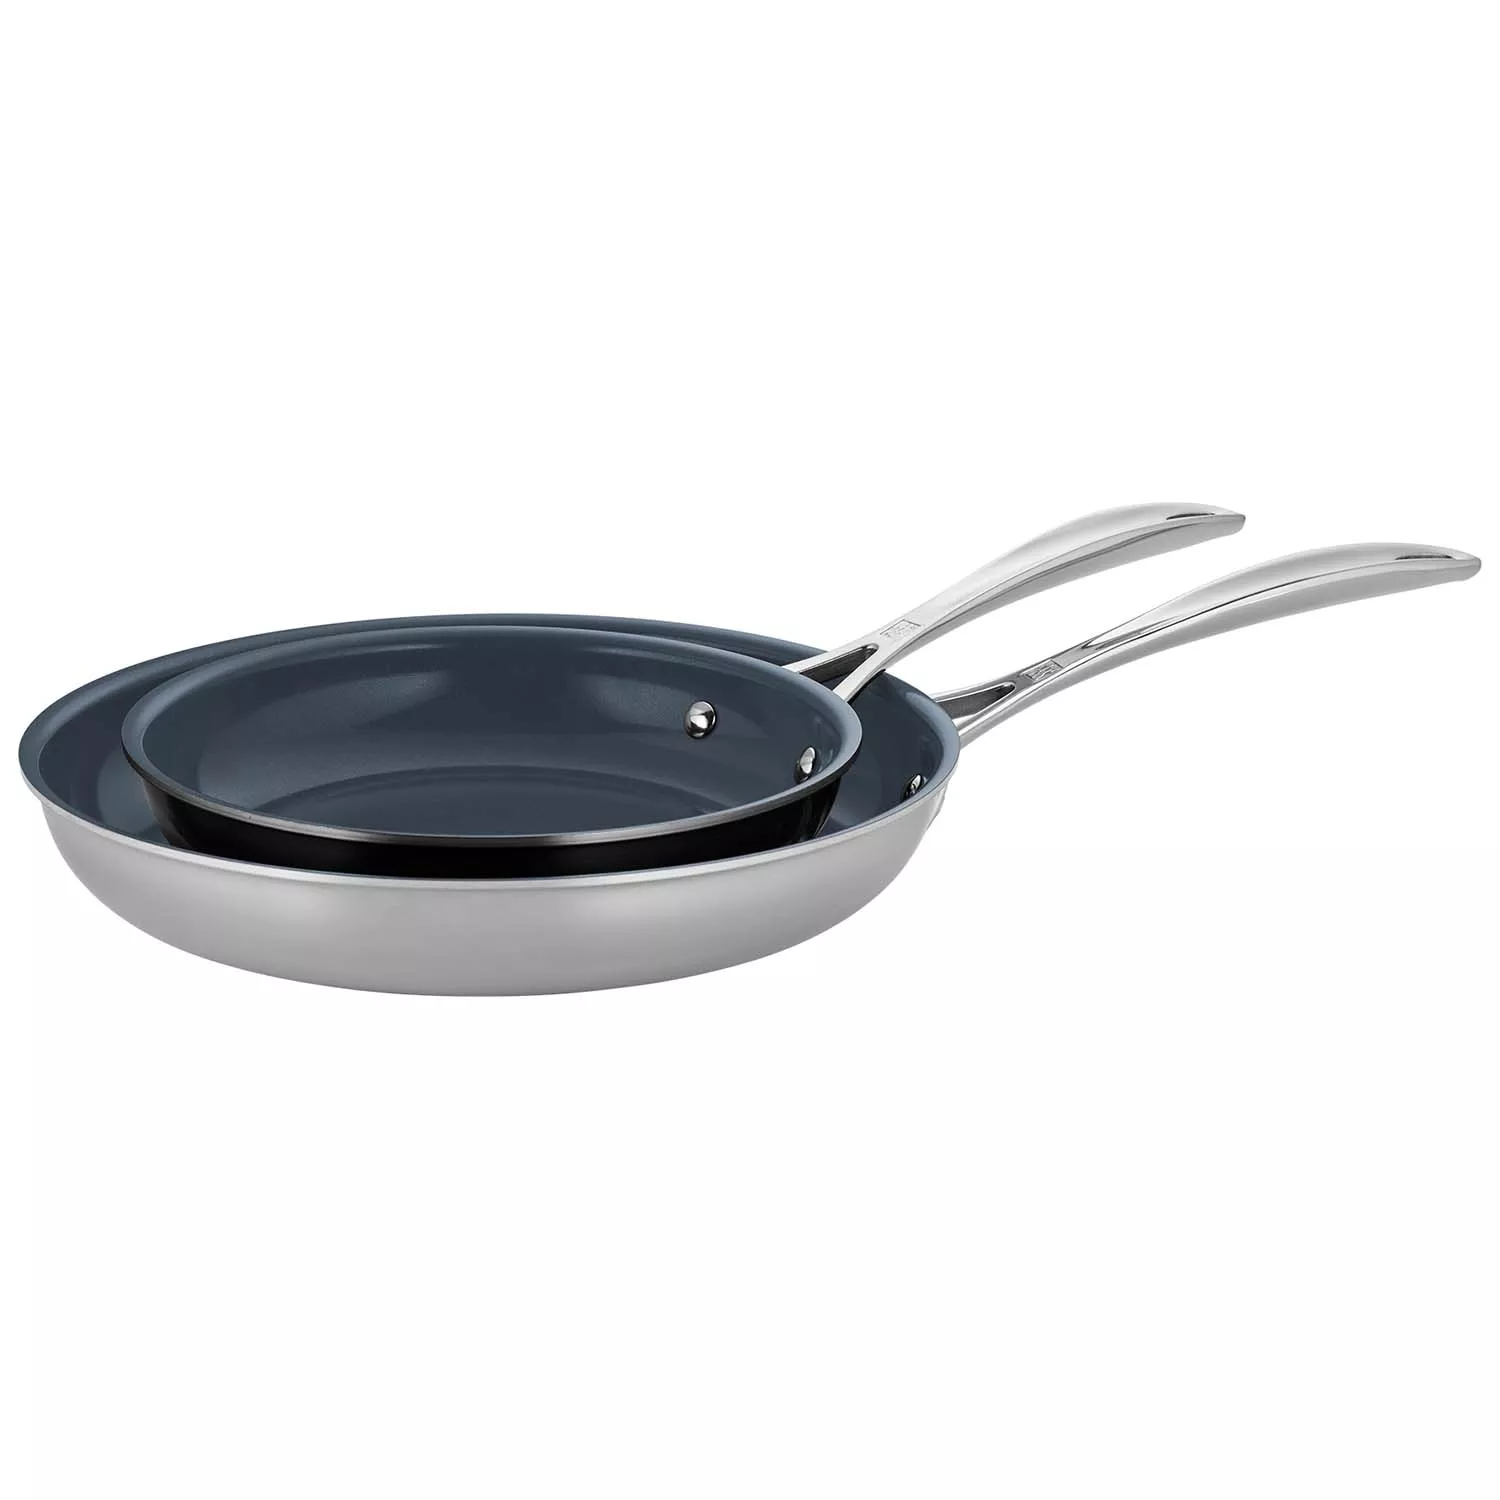 Zwilling Clad Cfx 8-inch Stainless Steel Ceramic Nonstick Fry Pan